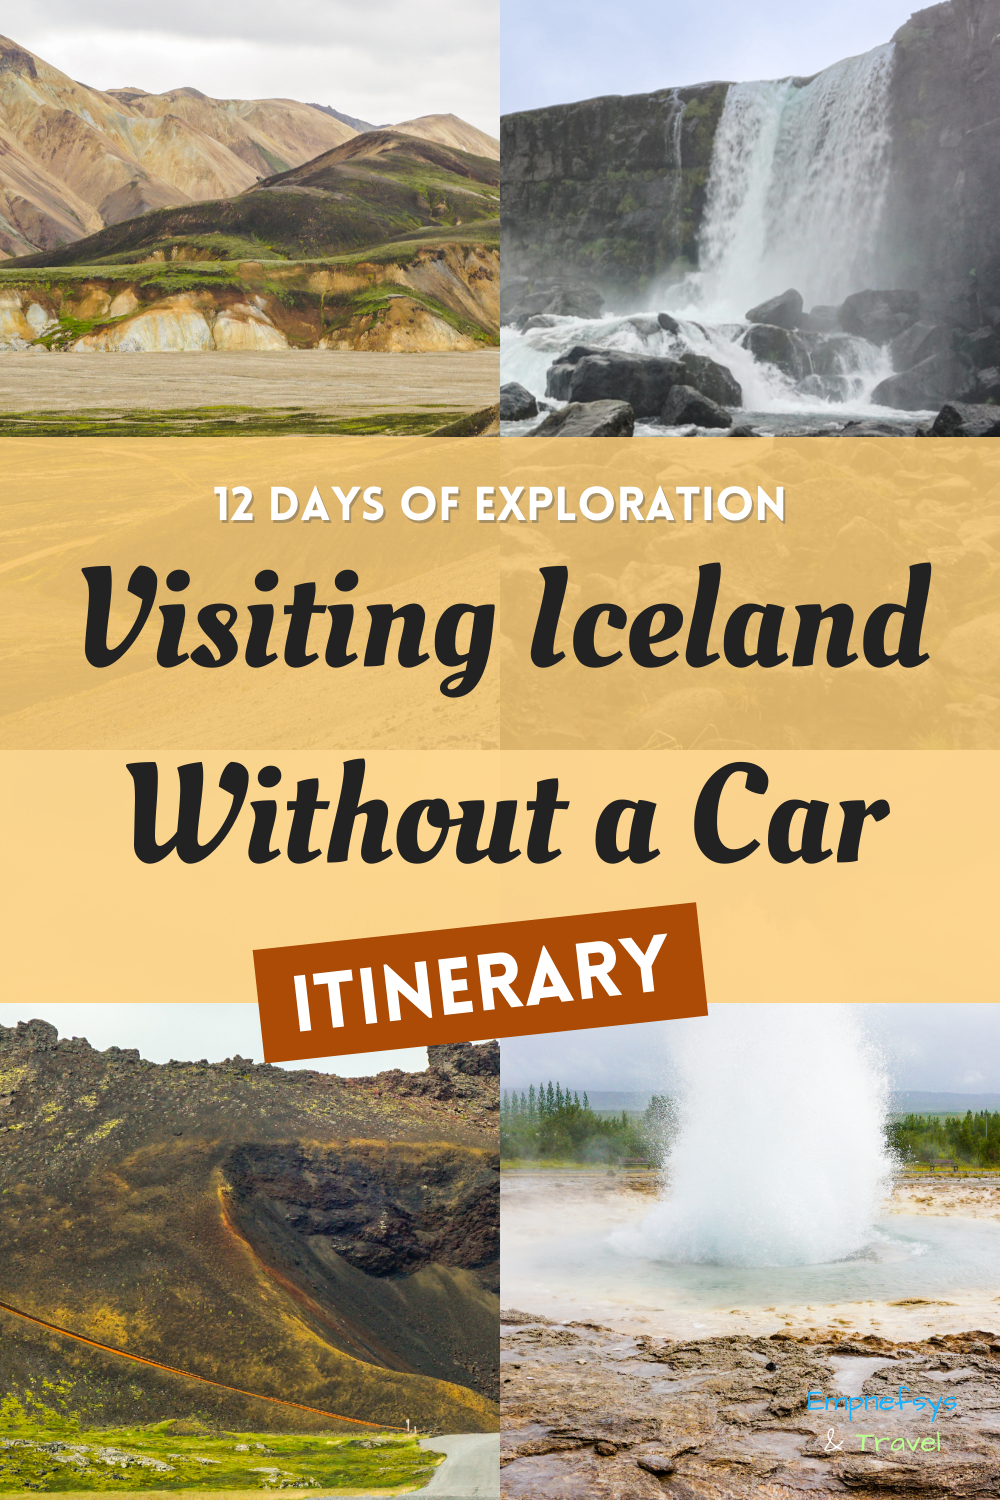 Pinterest Graphic for How to Visit Iceland Without A Car